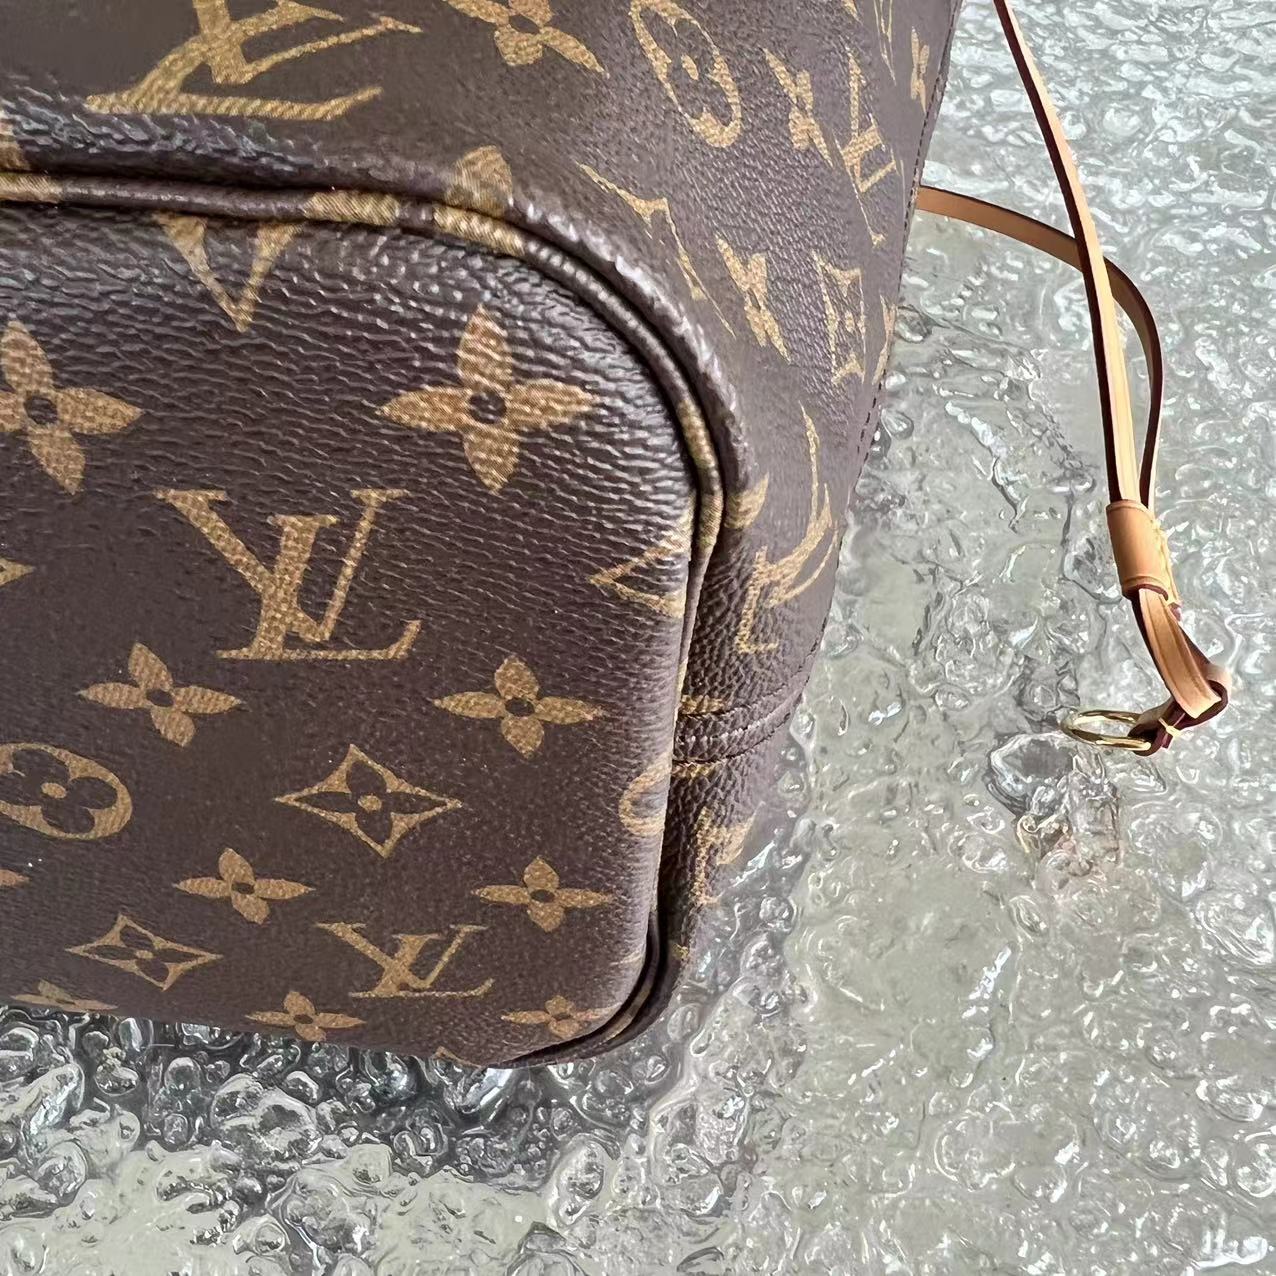 *Microchipped* Louis Vuitton LV Neverfull MM Monogram Canvas Leather